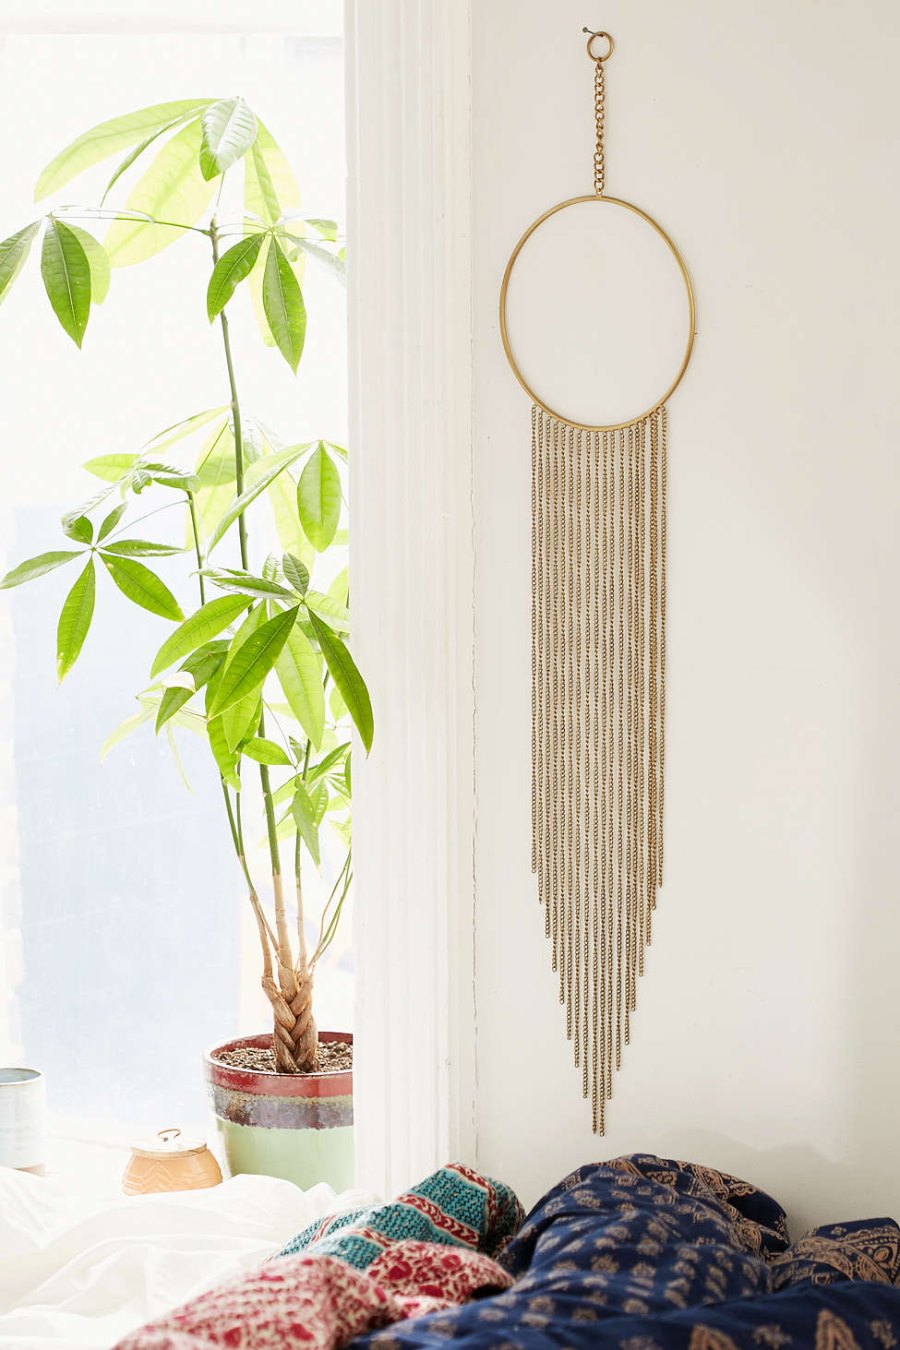 Metal wall hanging from Urban Outfitters